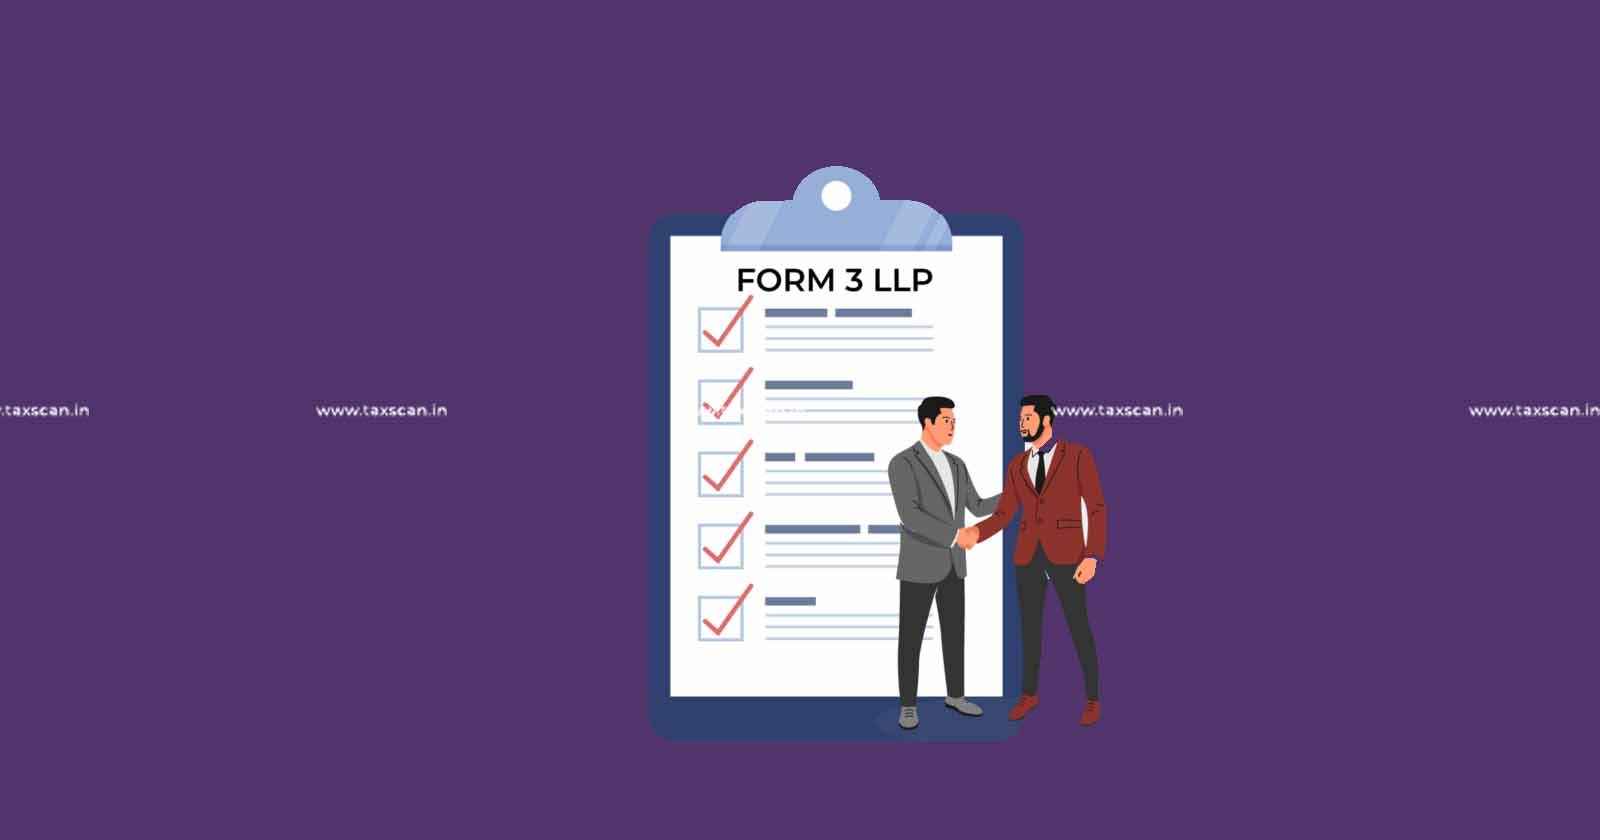 MCA releases Filing steps and FAQs -FAQs - MCA - FORM 3 LLP - FAQs on FORM 3 LLP - taxscan